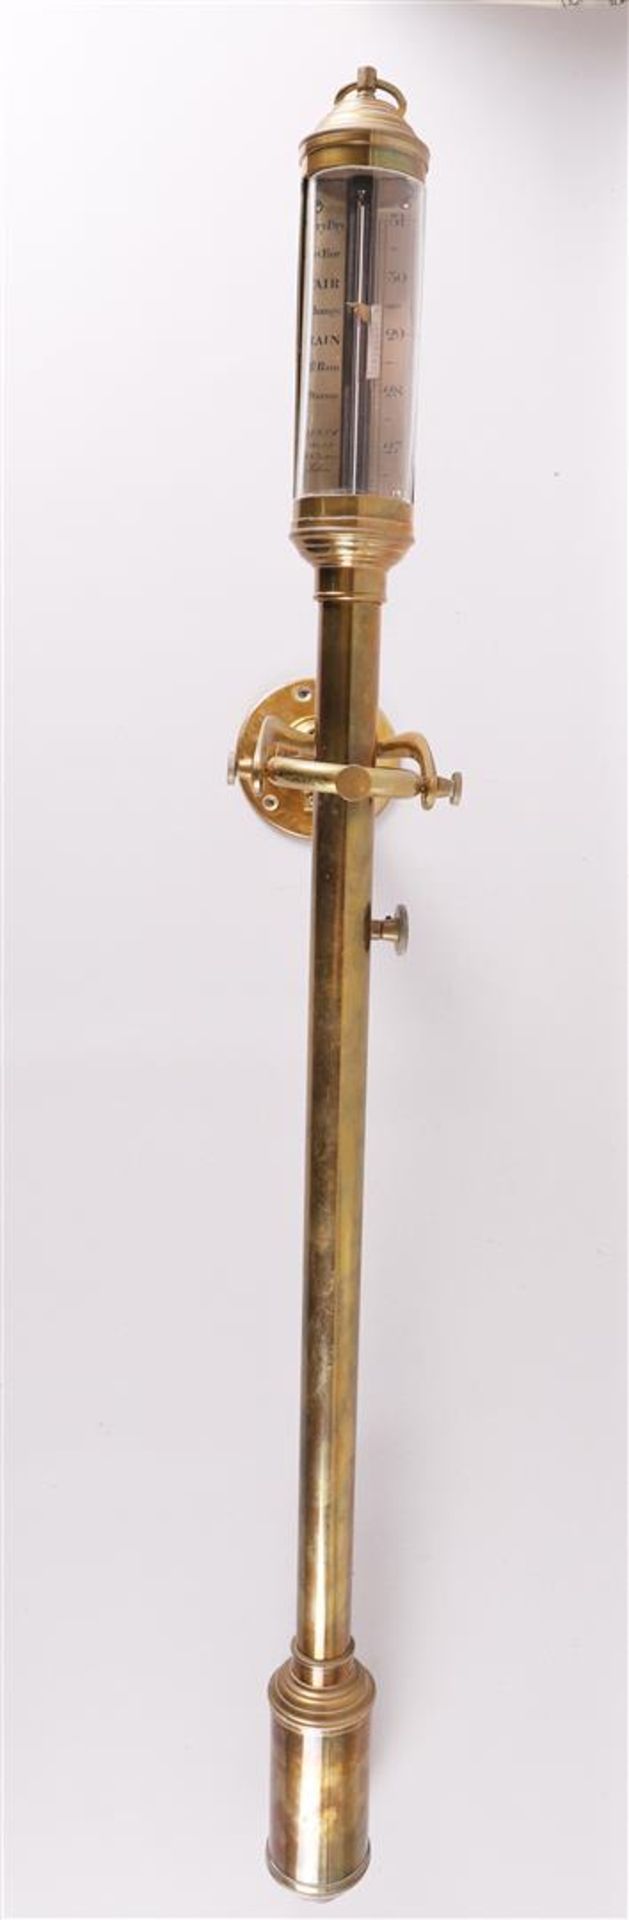 A ship's barometer with gimbal suspension in brass housing, 2nd half of the 20th century.